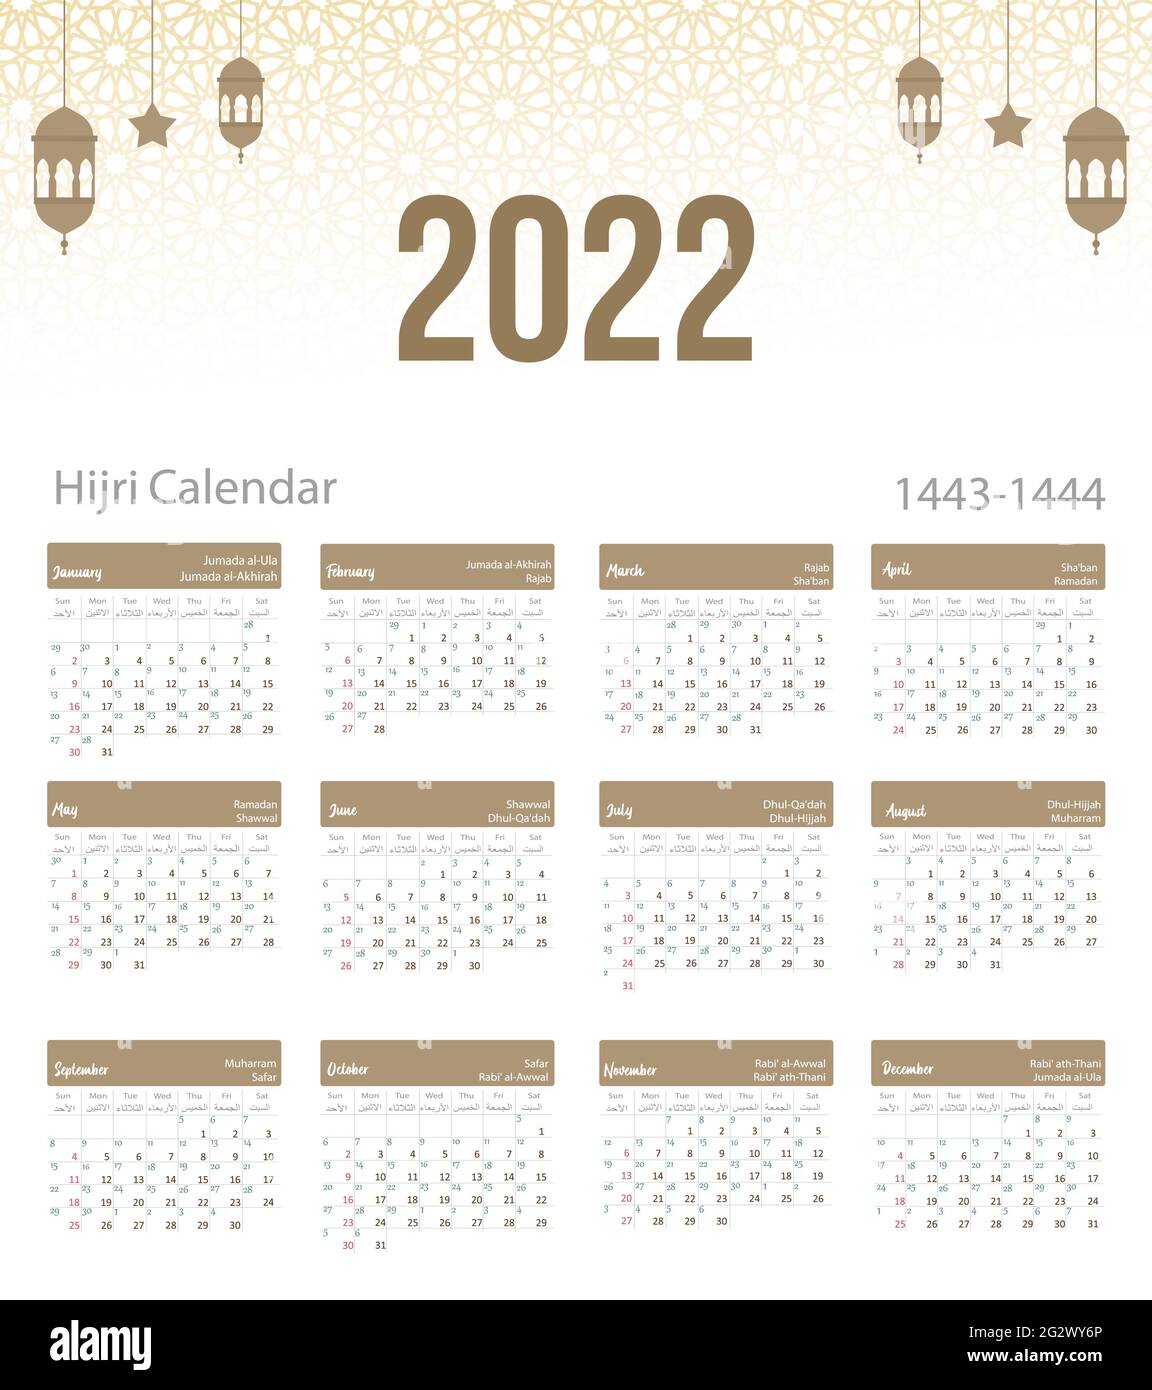 Calendar 2022 High Resolution Stock Photography And Images Alamy